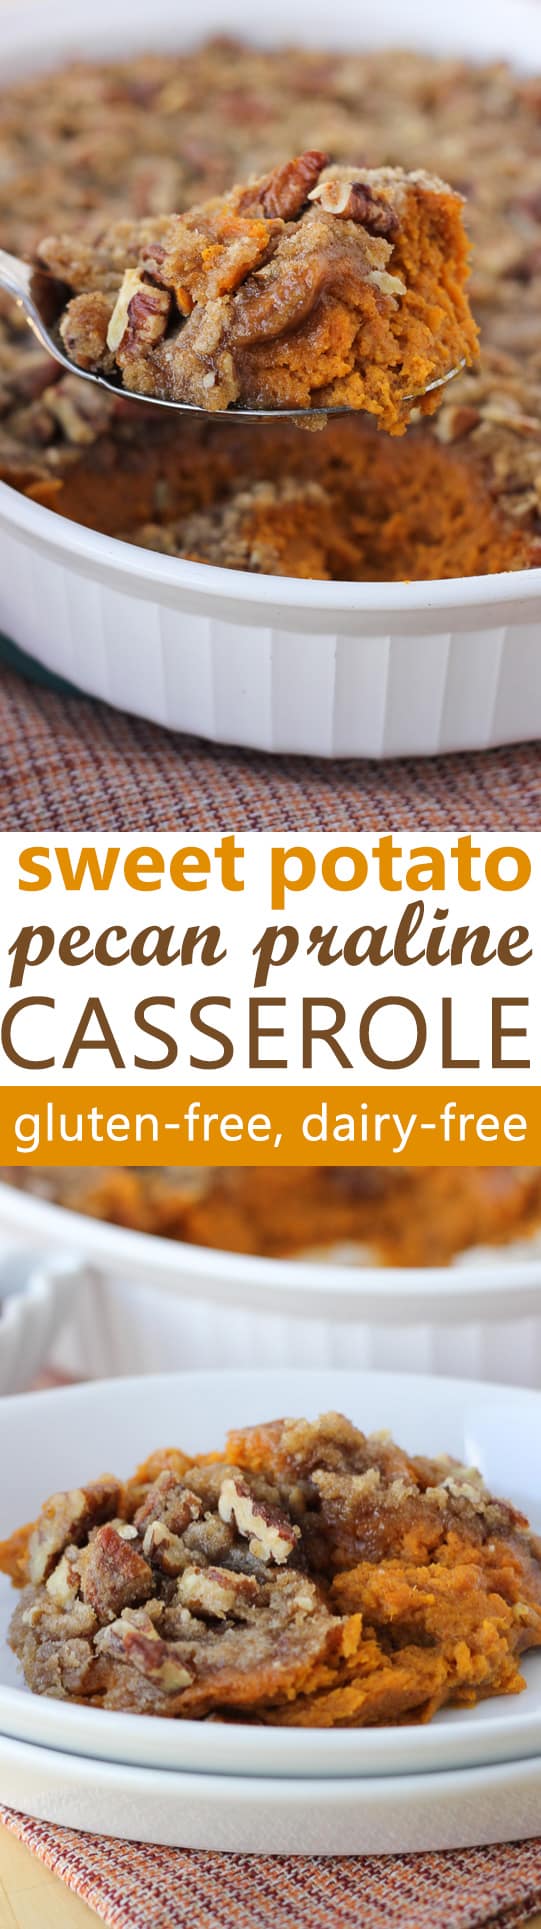 Sweet Potato Casserole with Pecan Praline Topping! The favorite Thanksgiving side dish every year. A gluten-free, dairy-free holiday side everyone will love! 